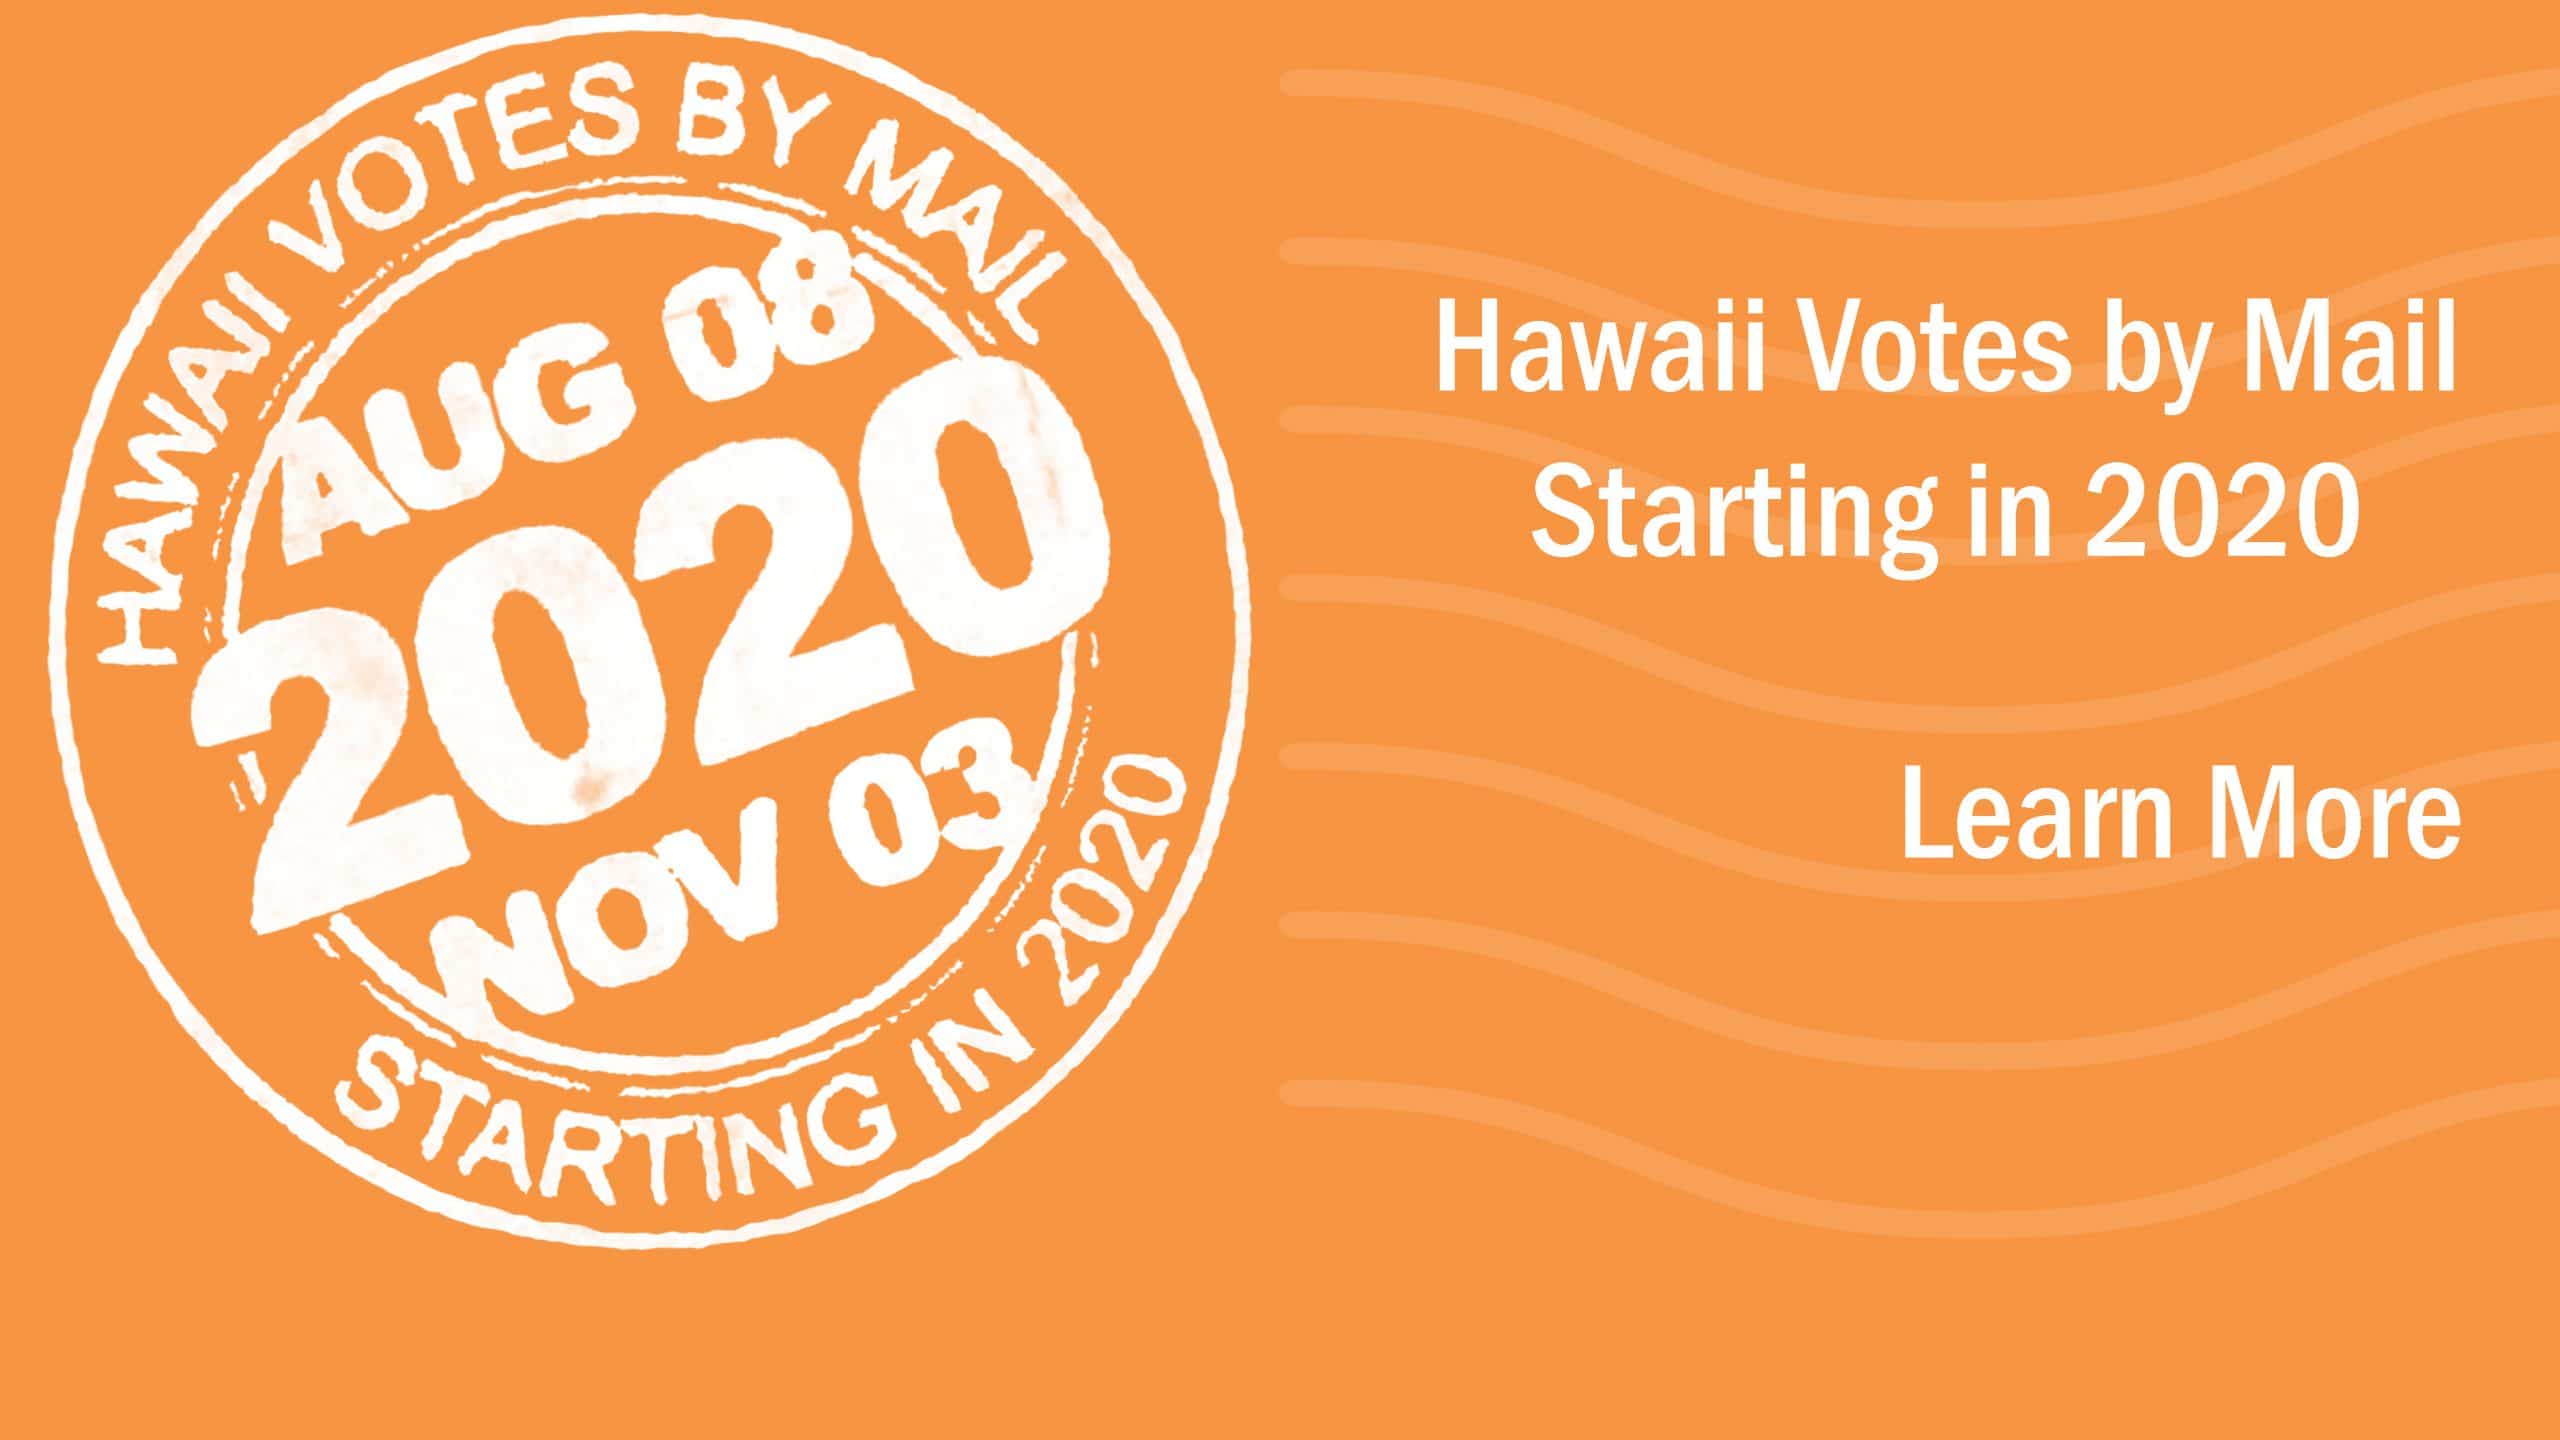 Office of Elections Hawaii Votes by Mail